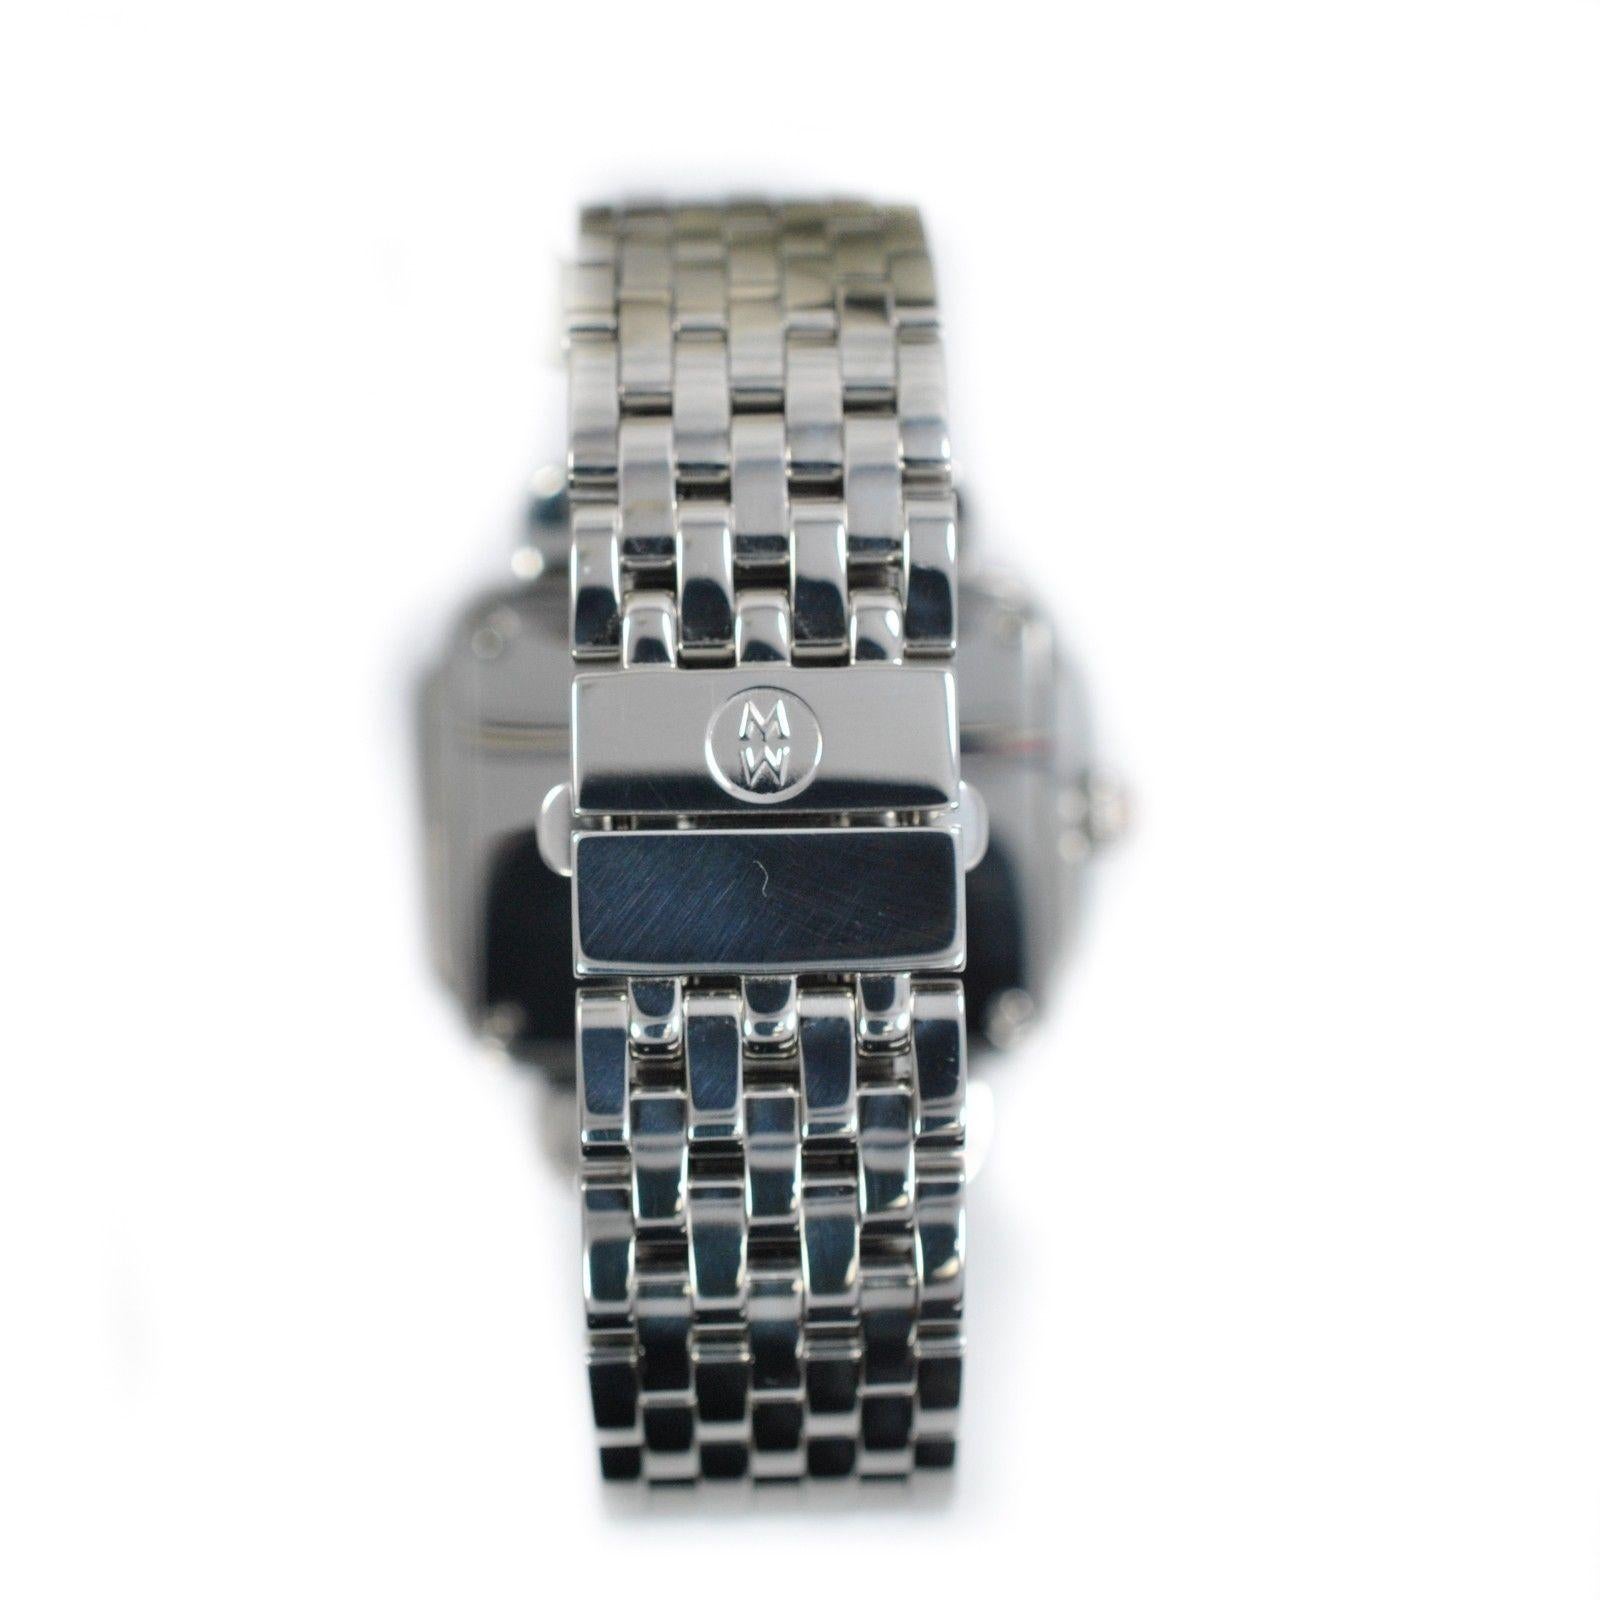 Michele Deco Reference #:MW06C01. MICHELE DECO MW06C01 STAINLESS 0.50CT DIAMOND BEZEL MOP QUARTZ WOMENS WATCH. Verified and Certified by WatchFacts. 1 year warranty offered by WatchFacts.